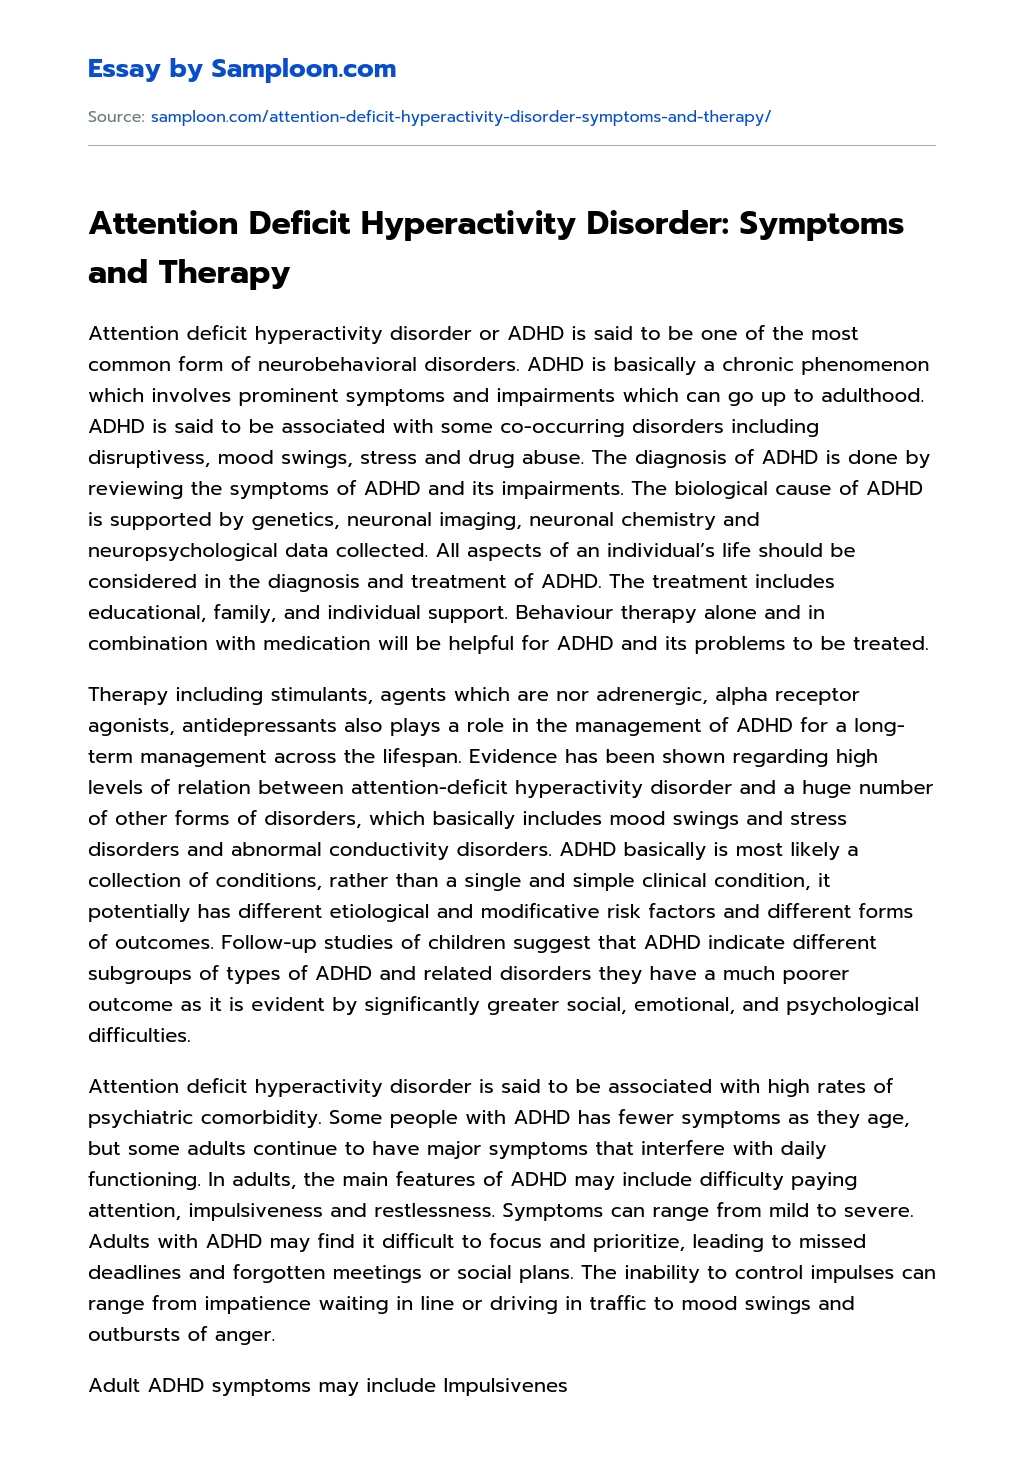 Attention Deficit Hyperactivity Disorder: Symptoms and Therapy Argumentative Essay essay